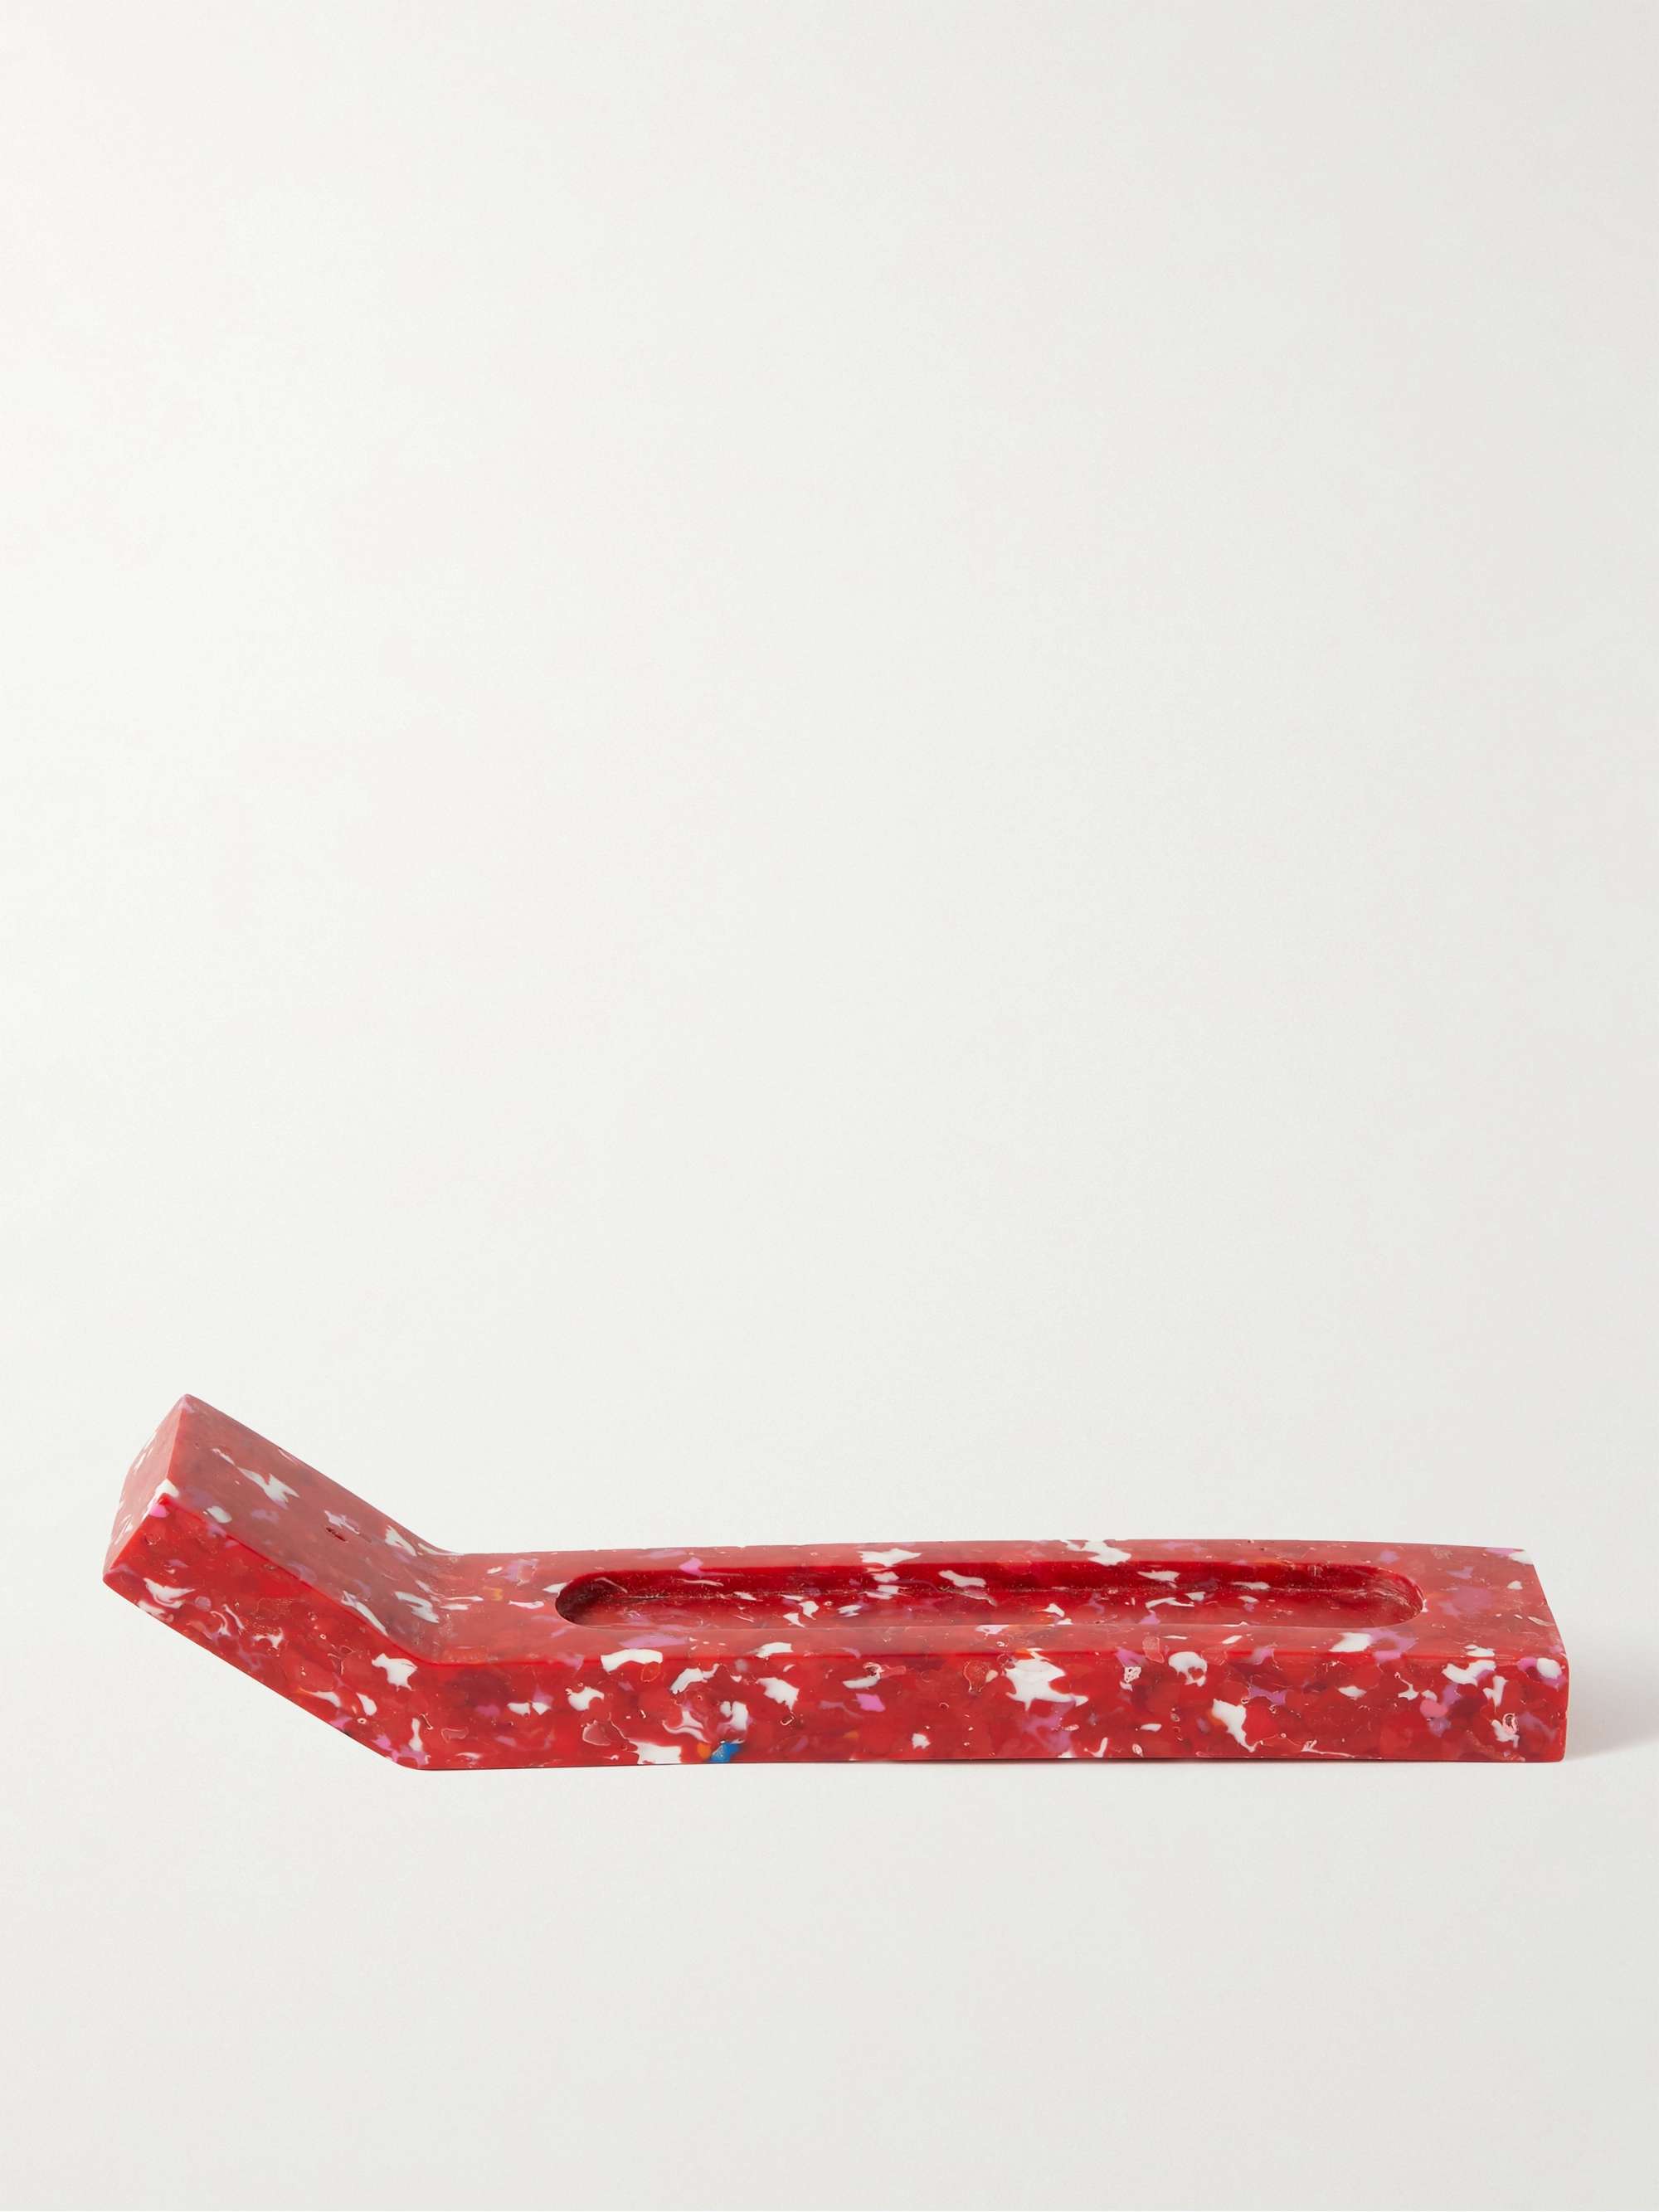 SPACE AVAILABLE Marble-Effect Recycled Plastic Incense Holder